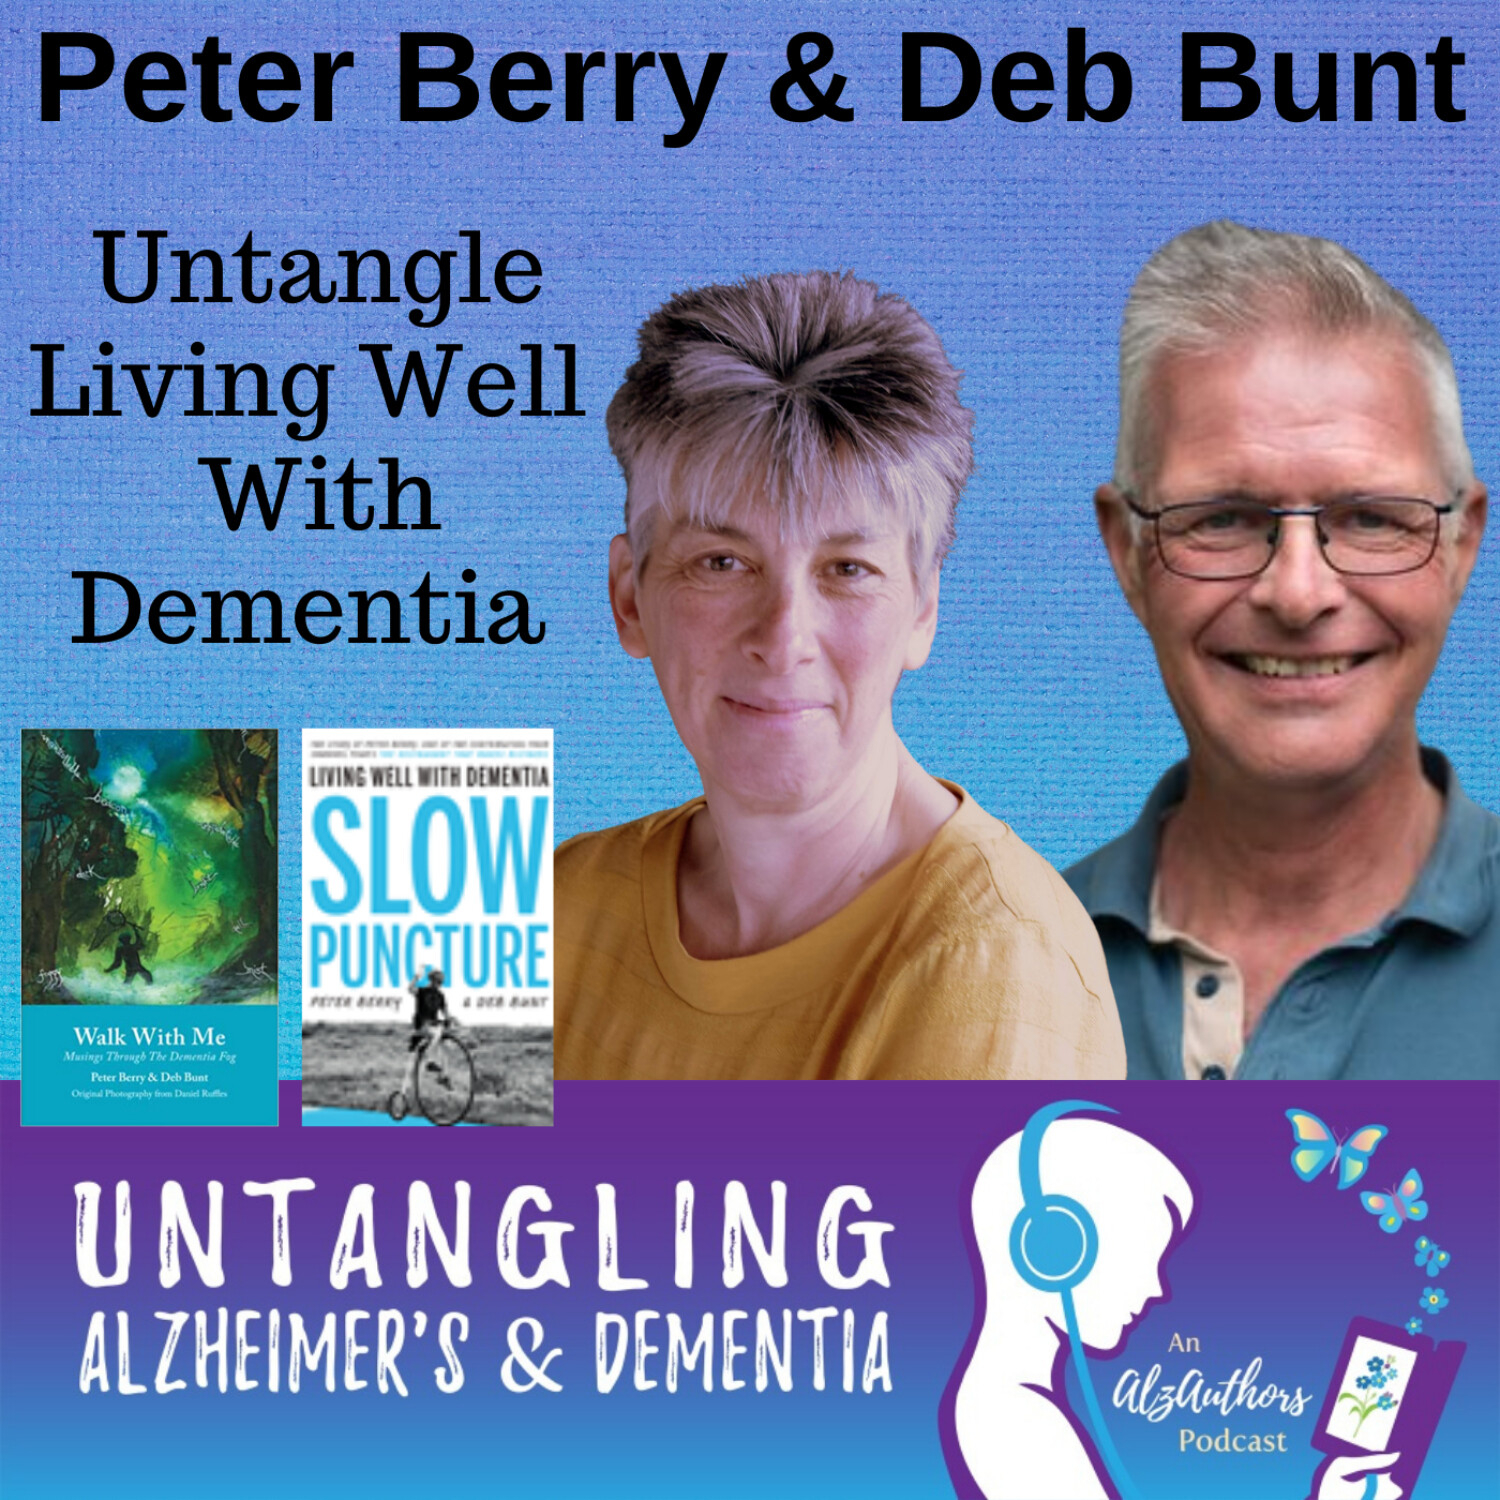 REPLAY: Peter Berry and Deb Bunt Untangle How to Live Well With Dementia